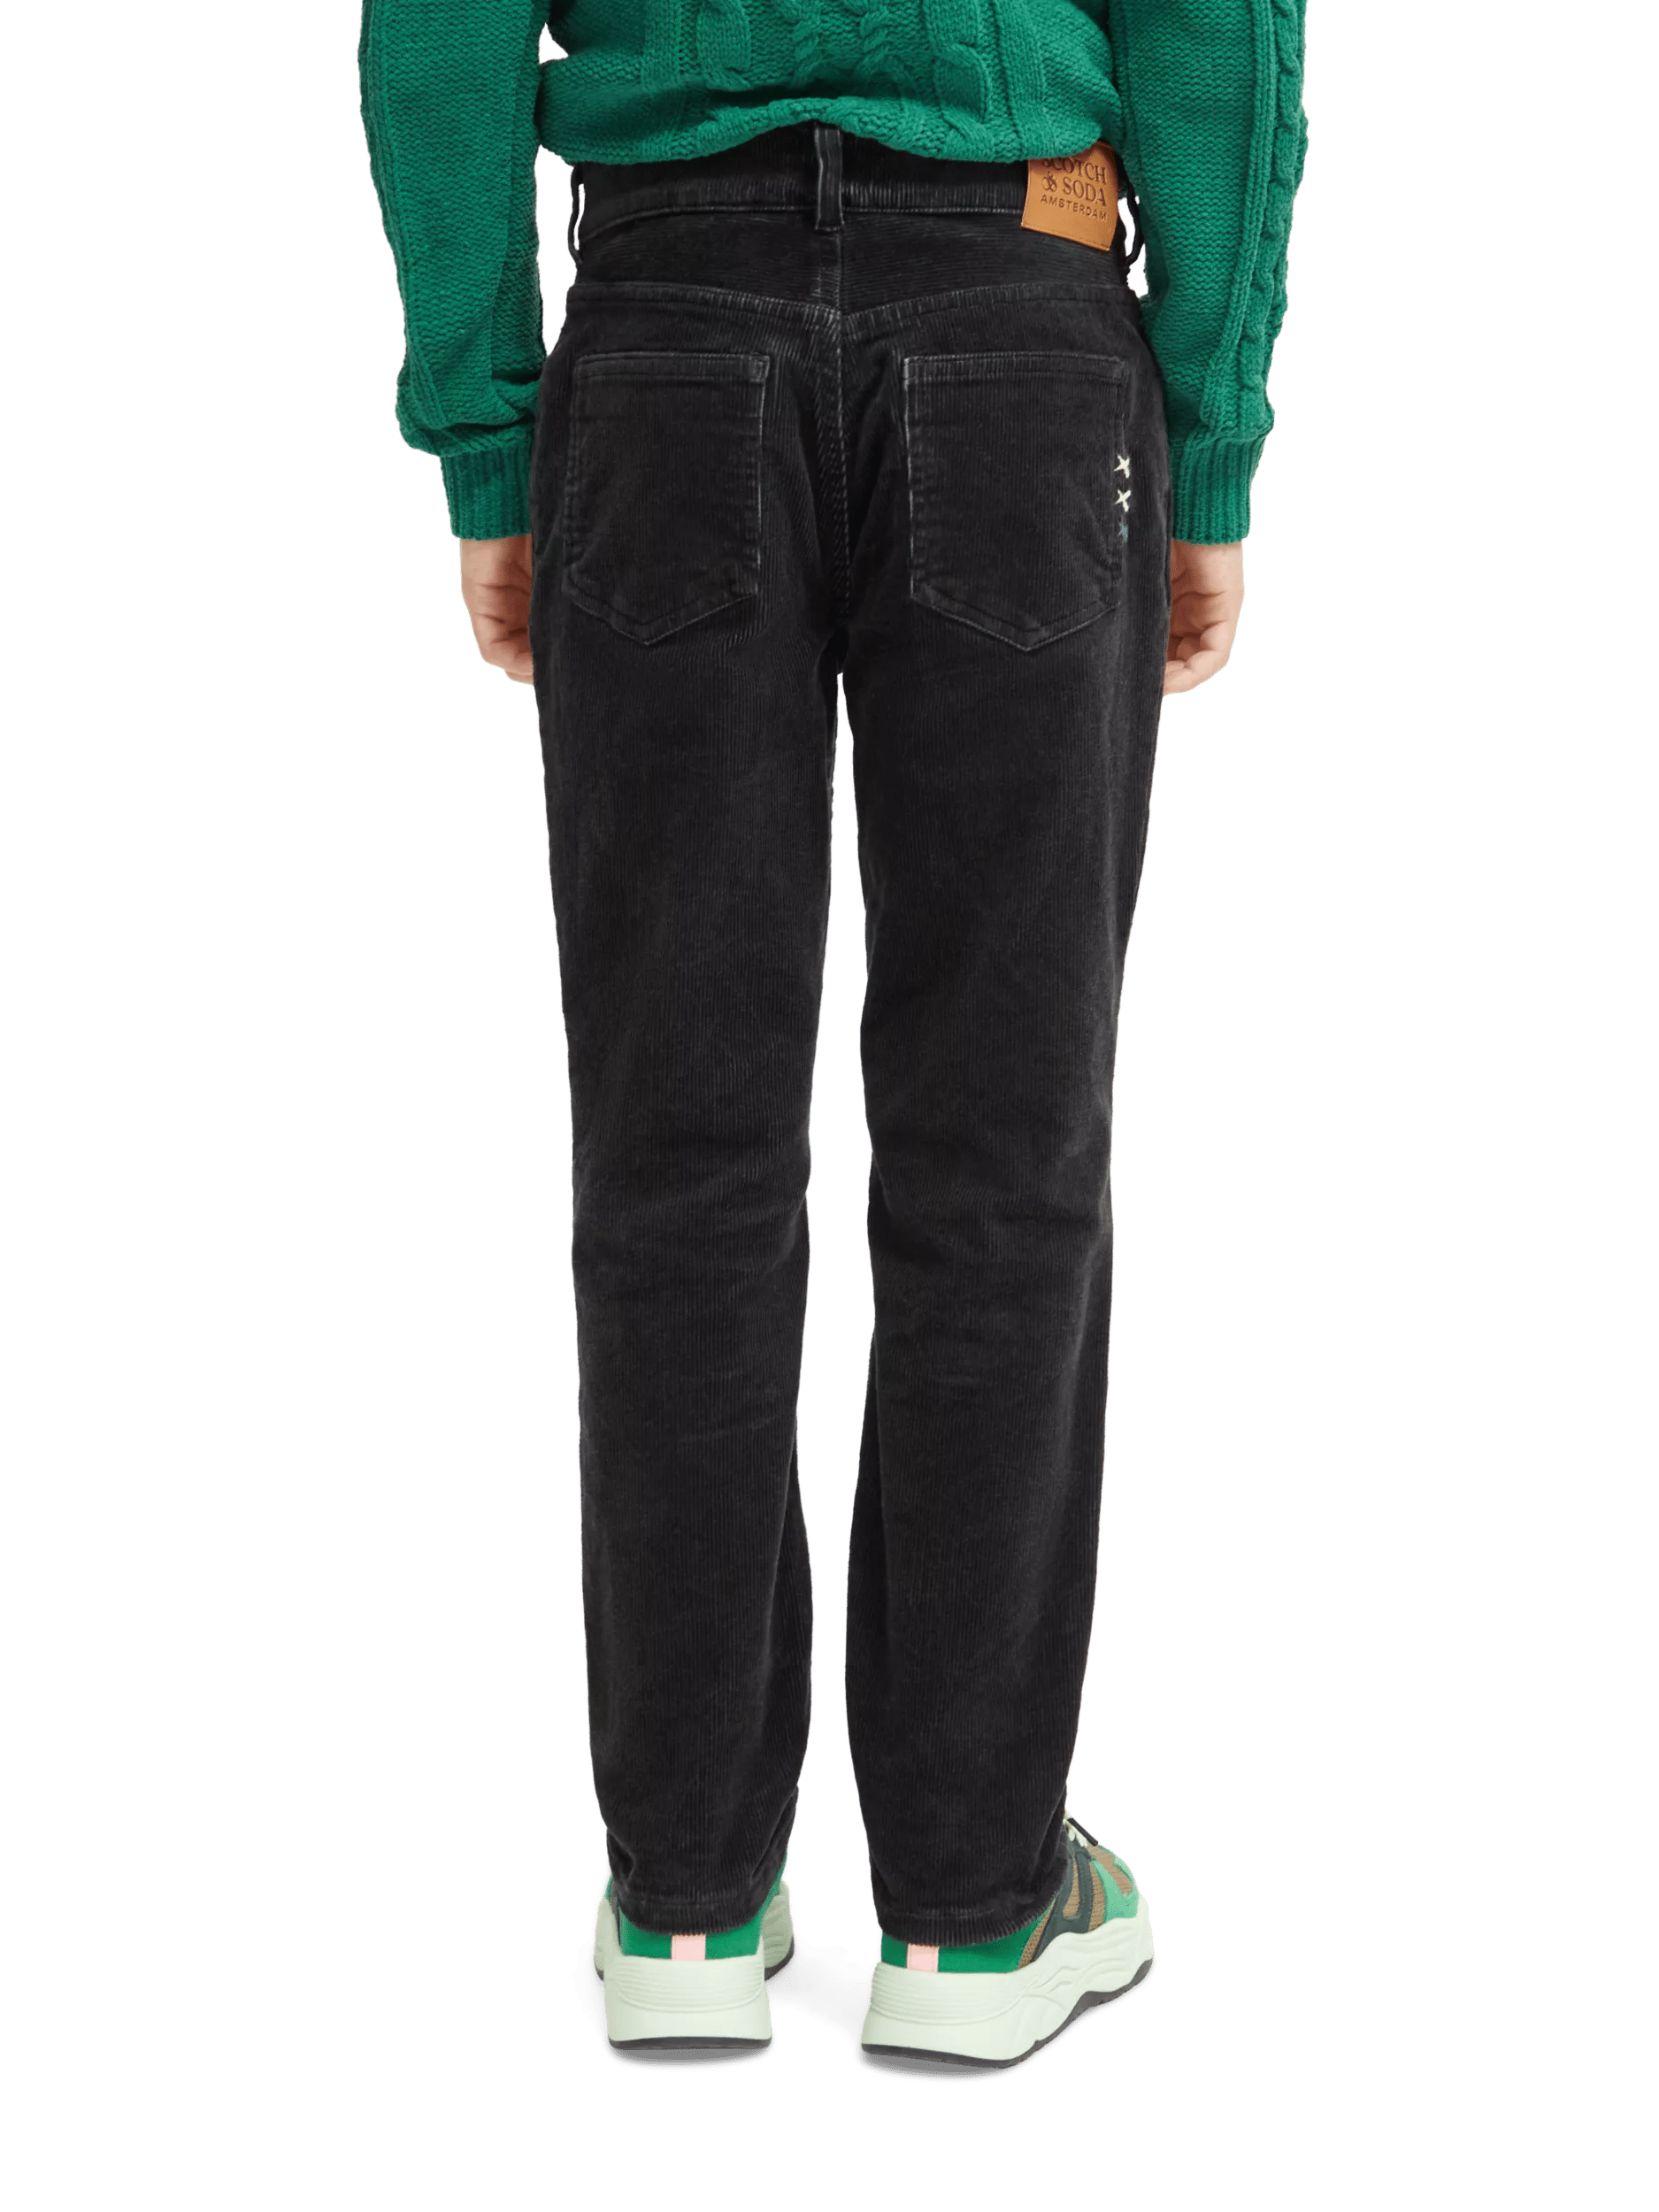 Scotch & Soda Dean loose tapered jeans in corduroy colours MDL-BCK